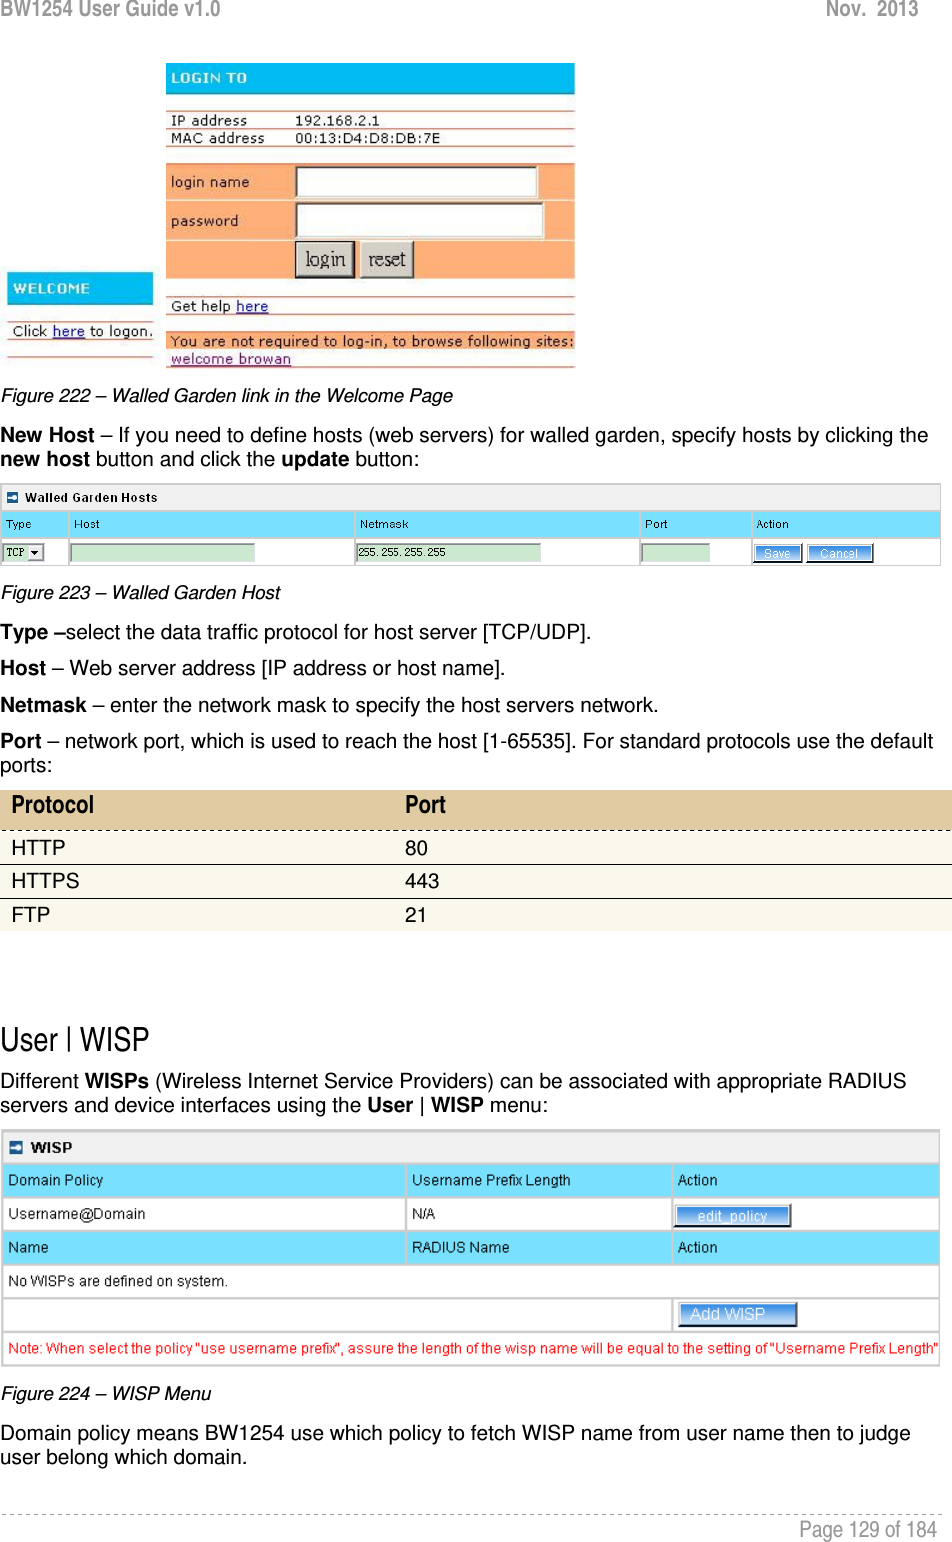 BW1254 User Guide v1.0  Nov.  2013     Page 129 of 184    Figure 222 – Walled Garden link in the Welcome Page New Host – If you need to define hosts (web servers) for walled garden, specify hosts by clicking the new host button and click the update button:  Figure 223 – Walled Garden Host Type –select the data traffic protocol for host server [TCP/UDP]. Host – Web server address [IP address or host name]. Netmask – enter the network mask to specify the host servers network. Port – network port, which is used to reach the host [1-65535]. For standard protocols use the default ports: Protocol  Port HTTP  80 HTTPS  443 FTP  21   User | WISP Different WISPs (Wireless Internet Service Providers) can be associated with appropriate RADIUS servers and device interfaces using the User | WISP menu:  Figure 224 – WISP Menu Domain policy means BW1254 use which policy to fetch WISP name from user name then to judge user belong which domain. 